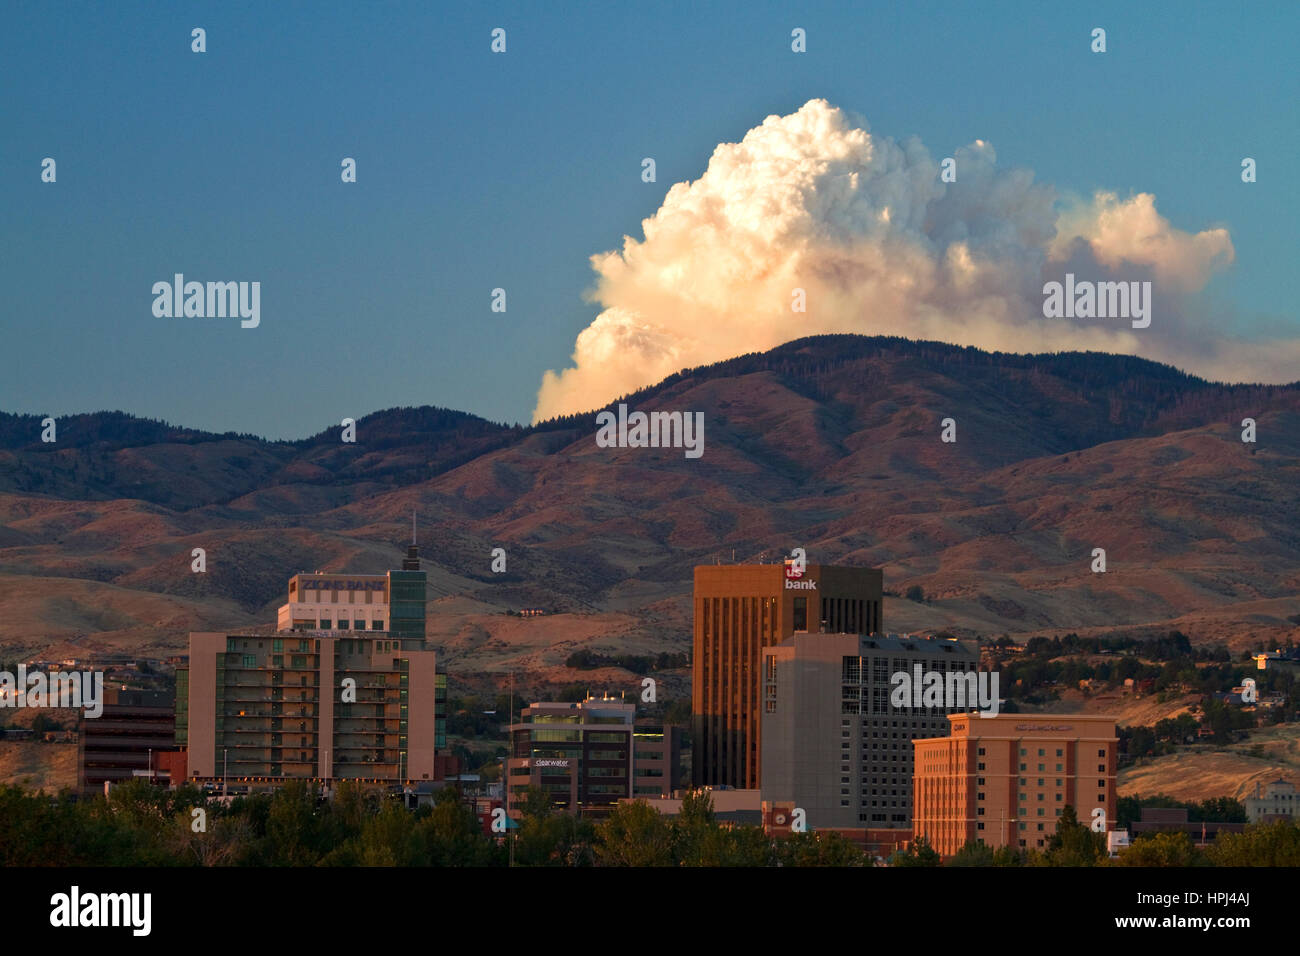 A pyrocumulus cloud above the foothills at Boise, Idaho, USA. Stock Photo